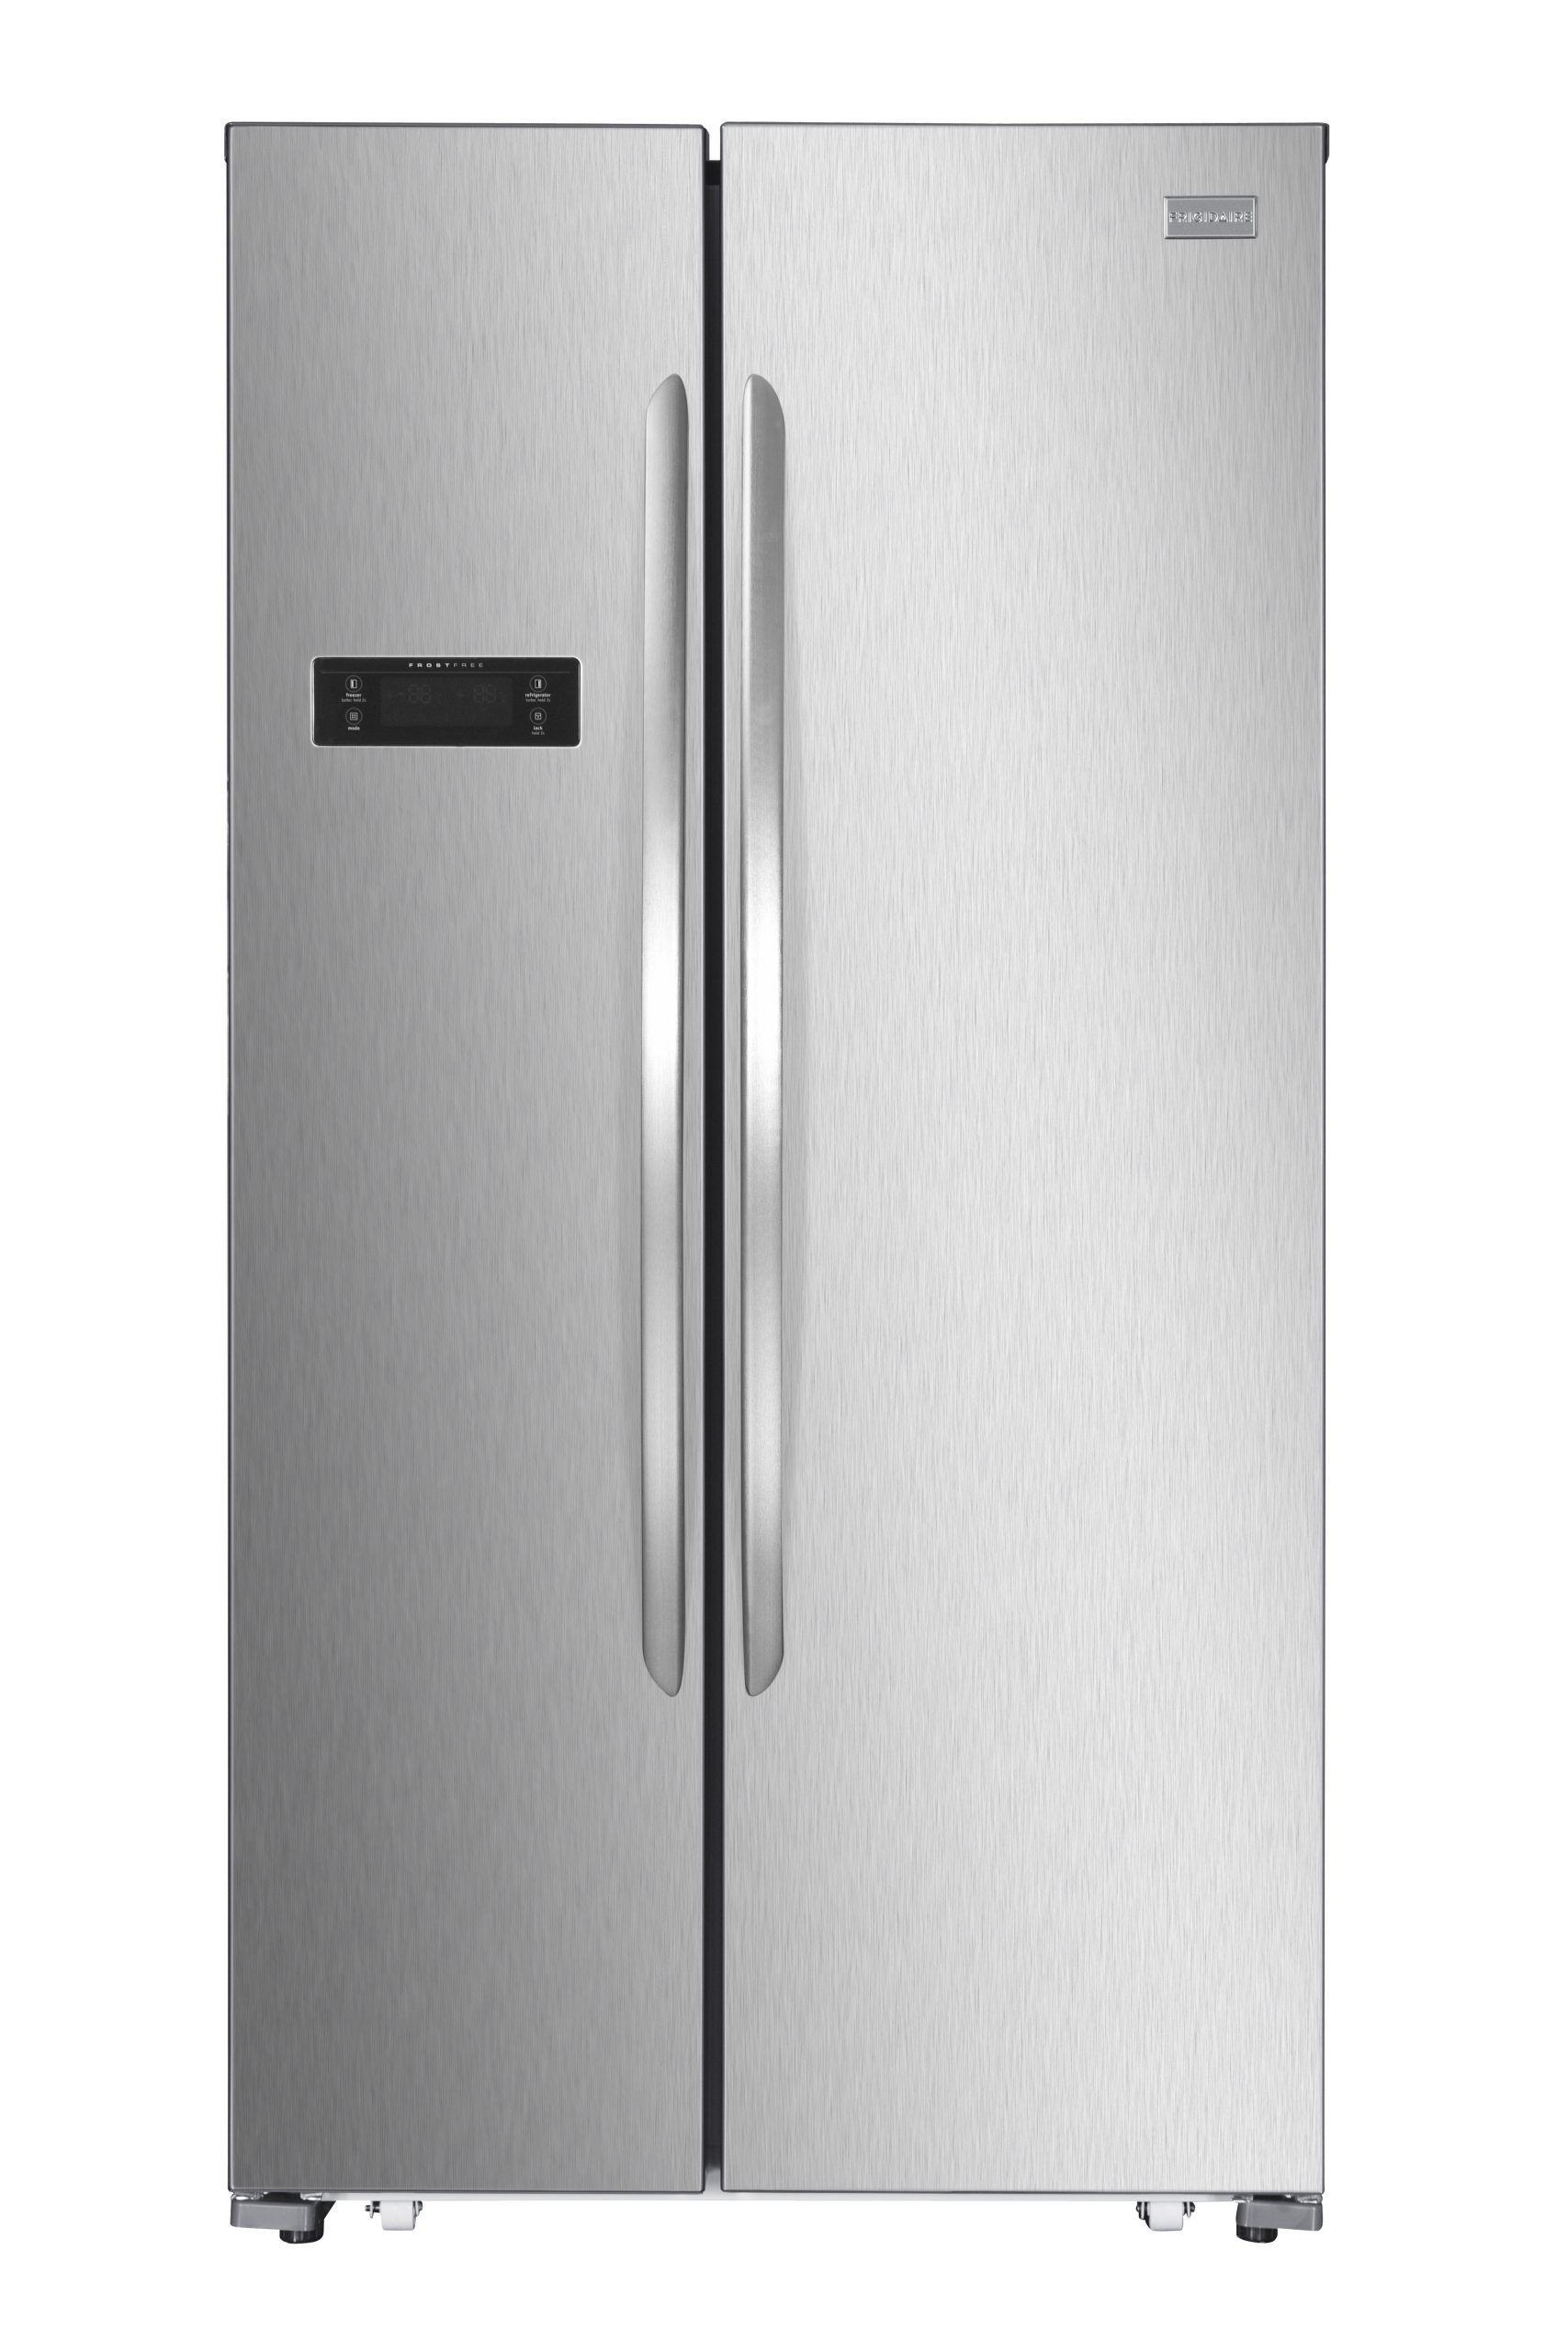 FRIGIDAIRE 18.3 CFT STAINLESS STEEL SIDE BY SIDE